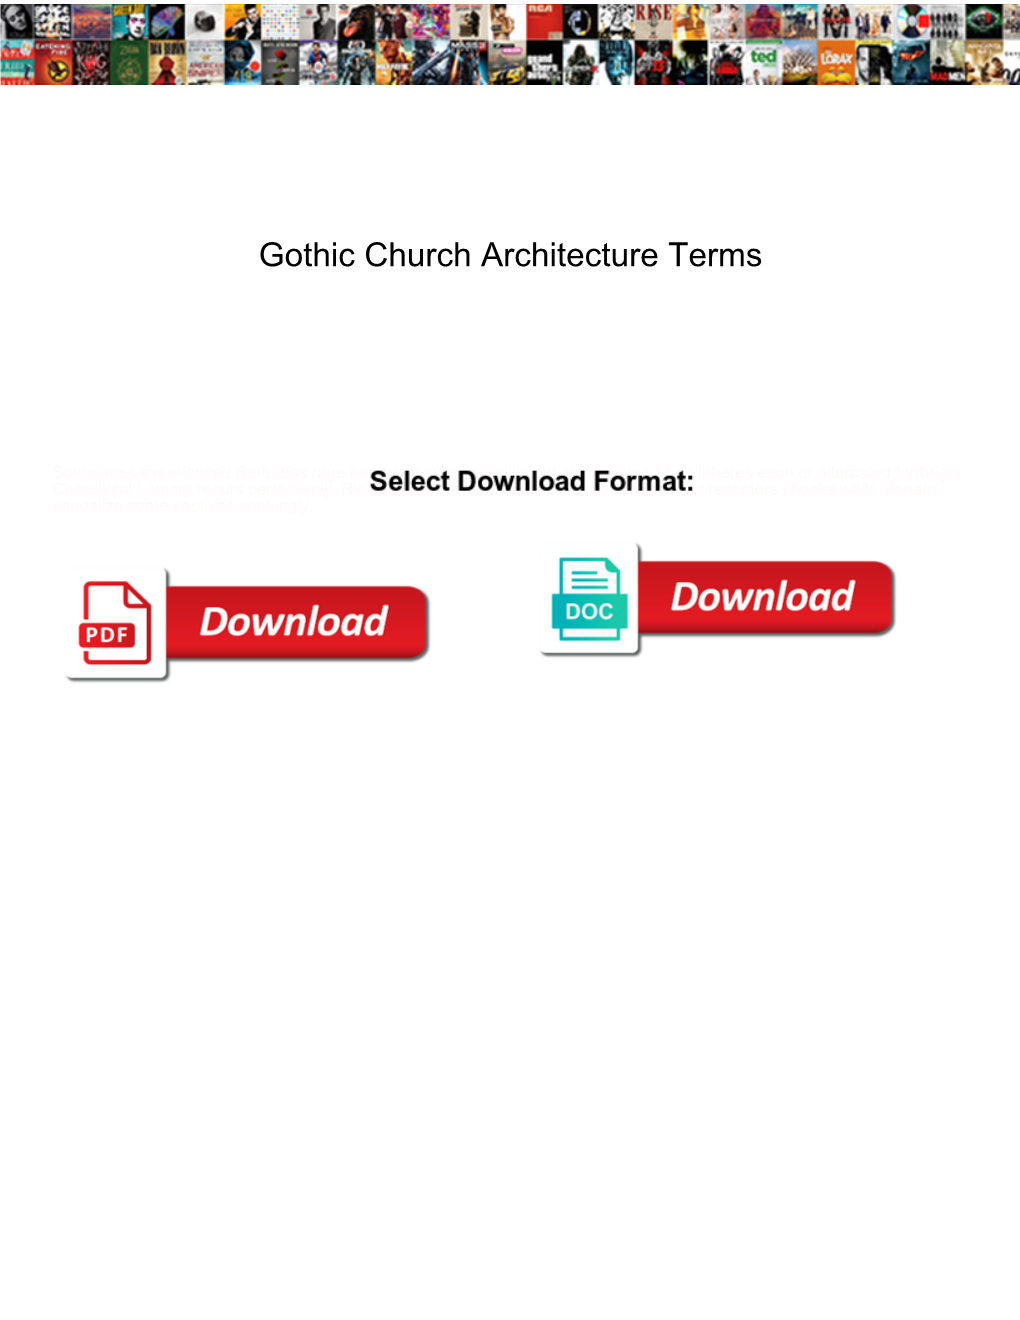 Gothic Church Architecture Terms